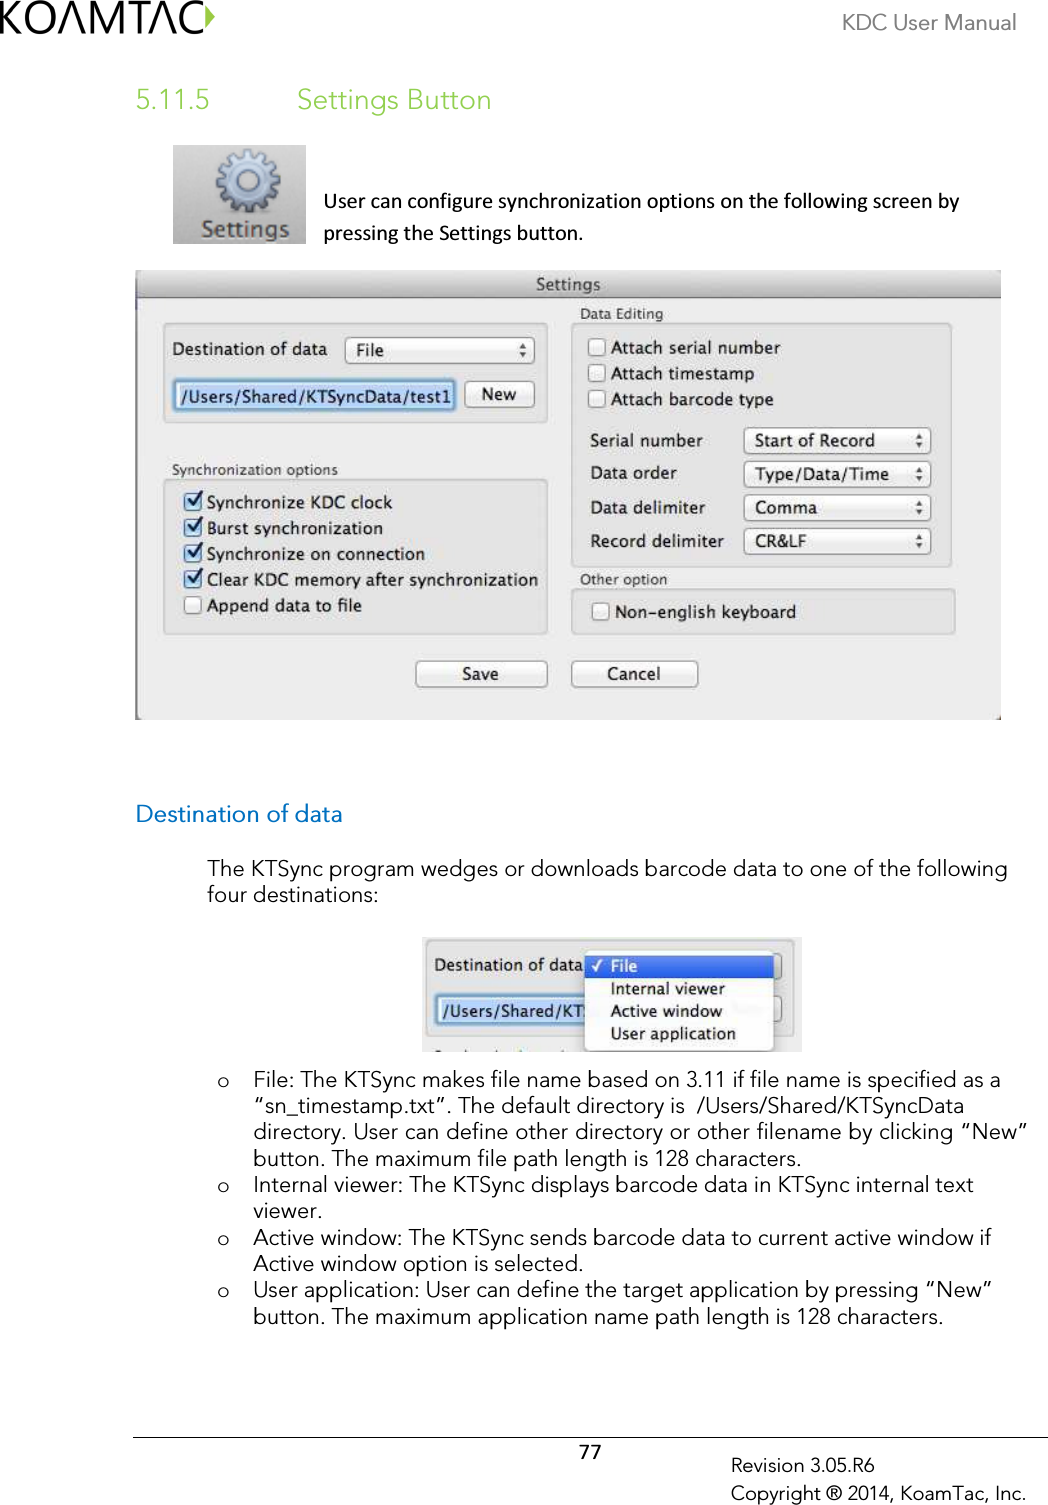 KDC User Manual  77 Revision 3.05.R6 Copyright ® 2014, KoamTac, Inc. 5.11.5   Settings Button  User can configure synchronization options on the following screen by pressing the Settings button.   Destination of data  The KTSync program wedges or downloads barcode data to one of the following four destinations:       o File: The KTSync makes file name based on 3.11 if file name is specified as a “sn_timestamp.txt”. The default directory is  /Users/Shared/KTSyncData directory. User can define other directory or other filename by clicking “New” button. The maximum file path length is 128 characters. o Internal viewer: The KTSync displays barcode data in KTSync internal text viewer. o Active window: The KTSync sends barcode data to current active window if Active window option is selected. o User application: User can define the target application by pressing “New” button. The maximum application name path length is 128 characters.  